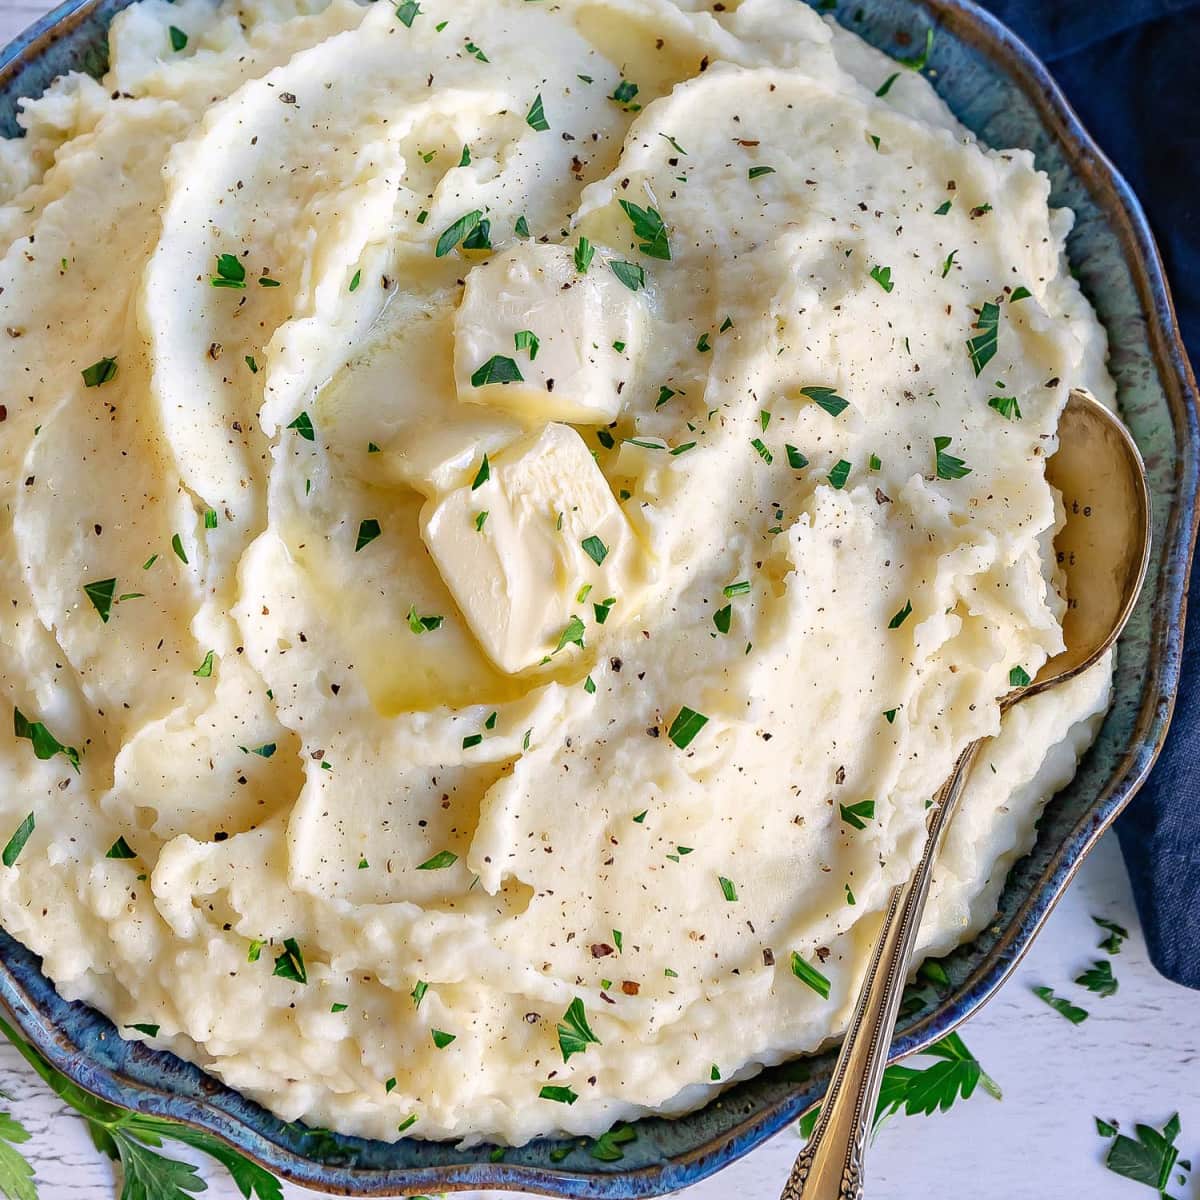 The BEST Mashed Potatoes! - Mom On Timeout